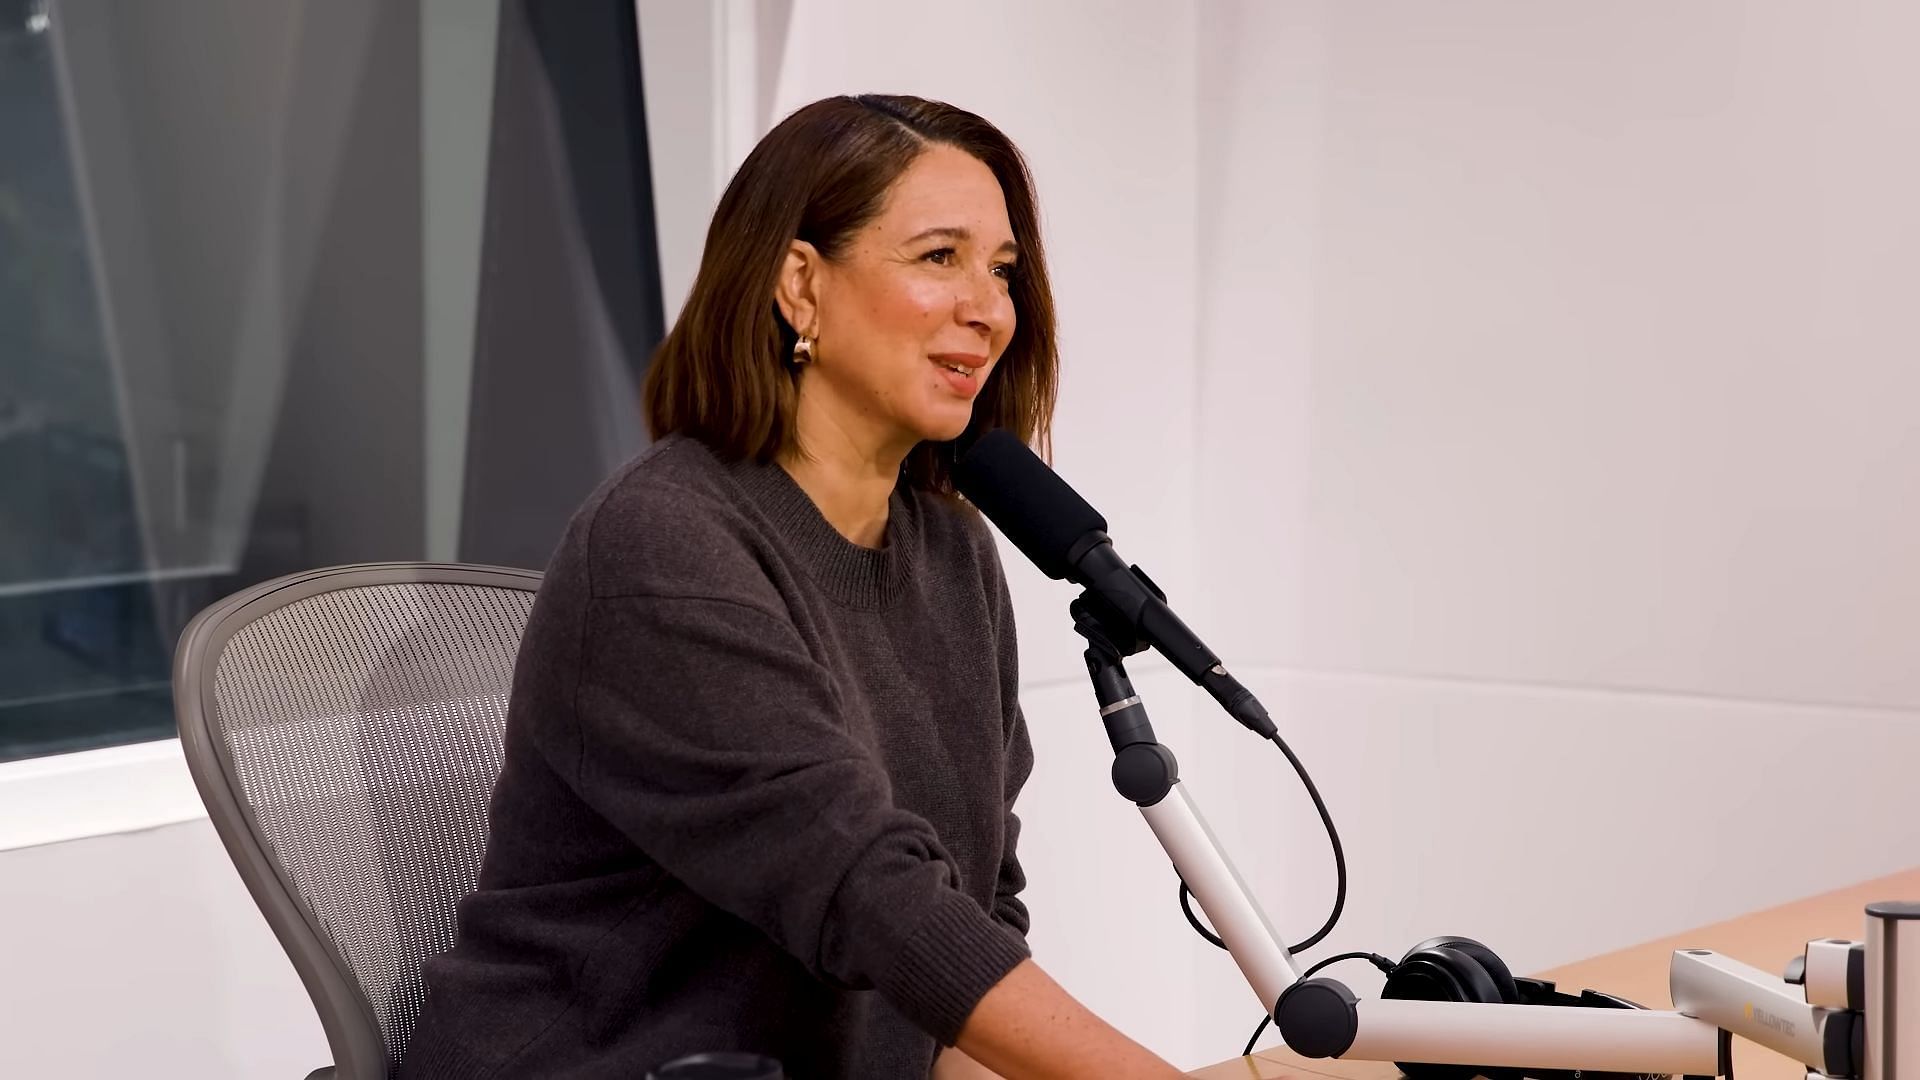 Maya Rudolph shared her opinions on the intense criticism faced by entertainers today (Image via YouTube/Apple Music)